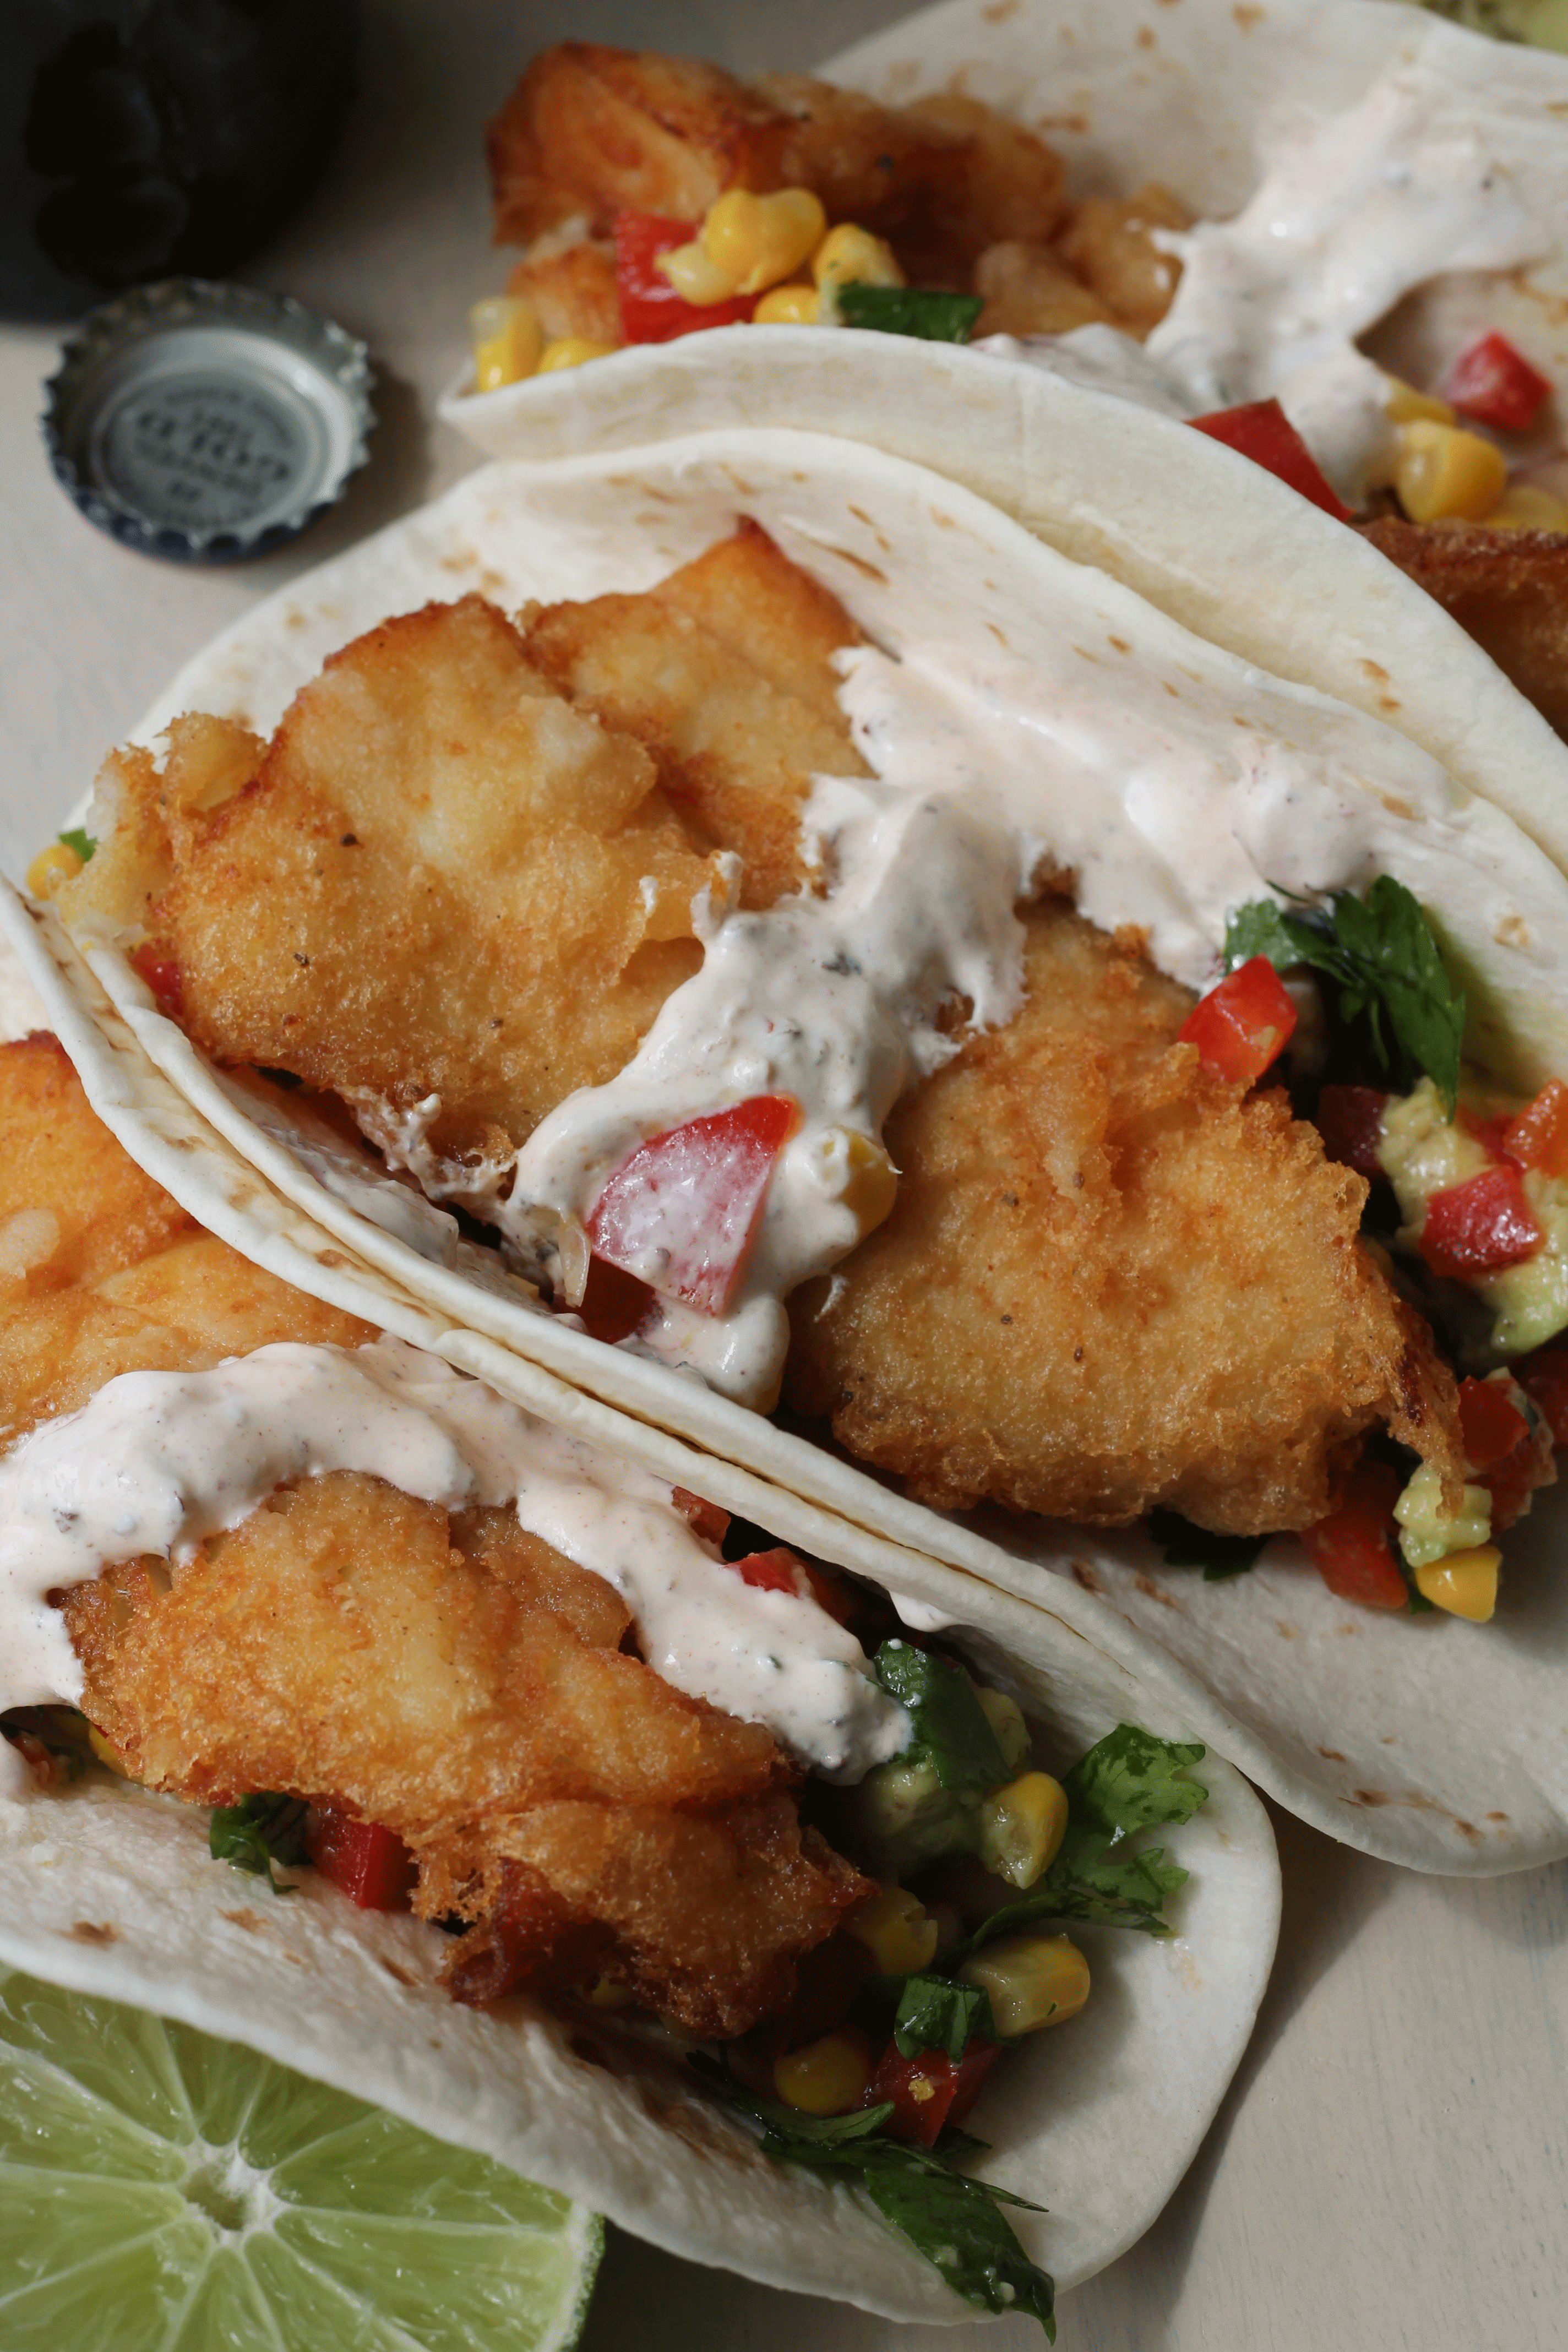 Beer Battered Fish Tacos with Avocado Corn Salsa and Chipotle Sour Cream